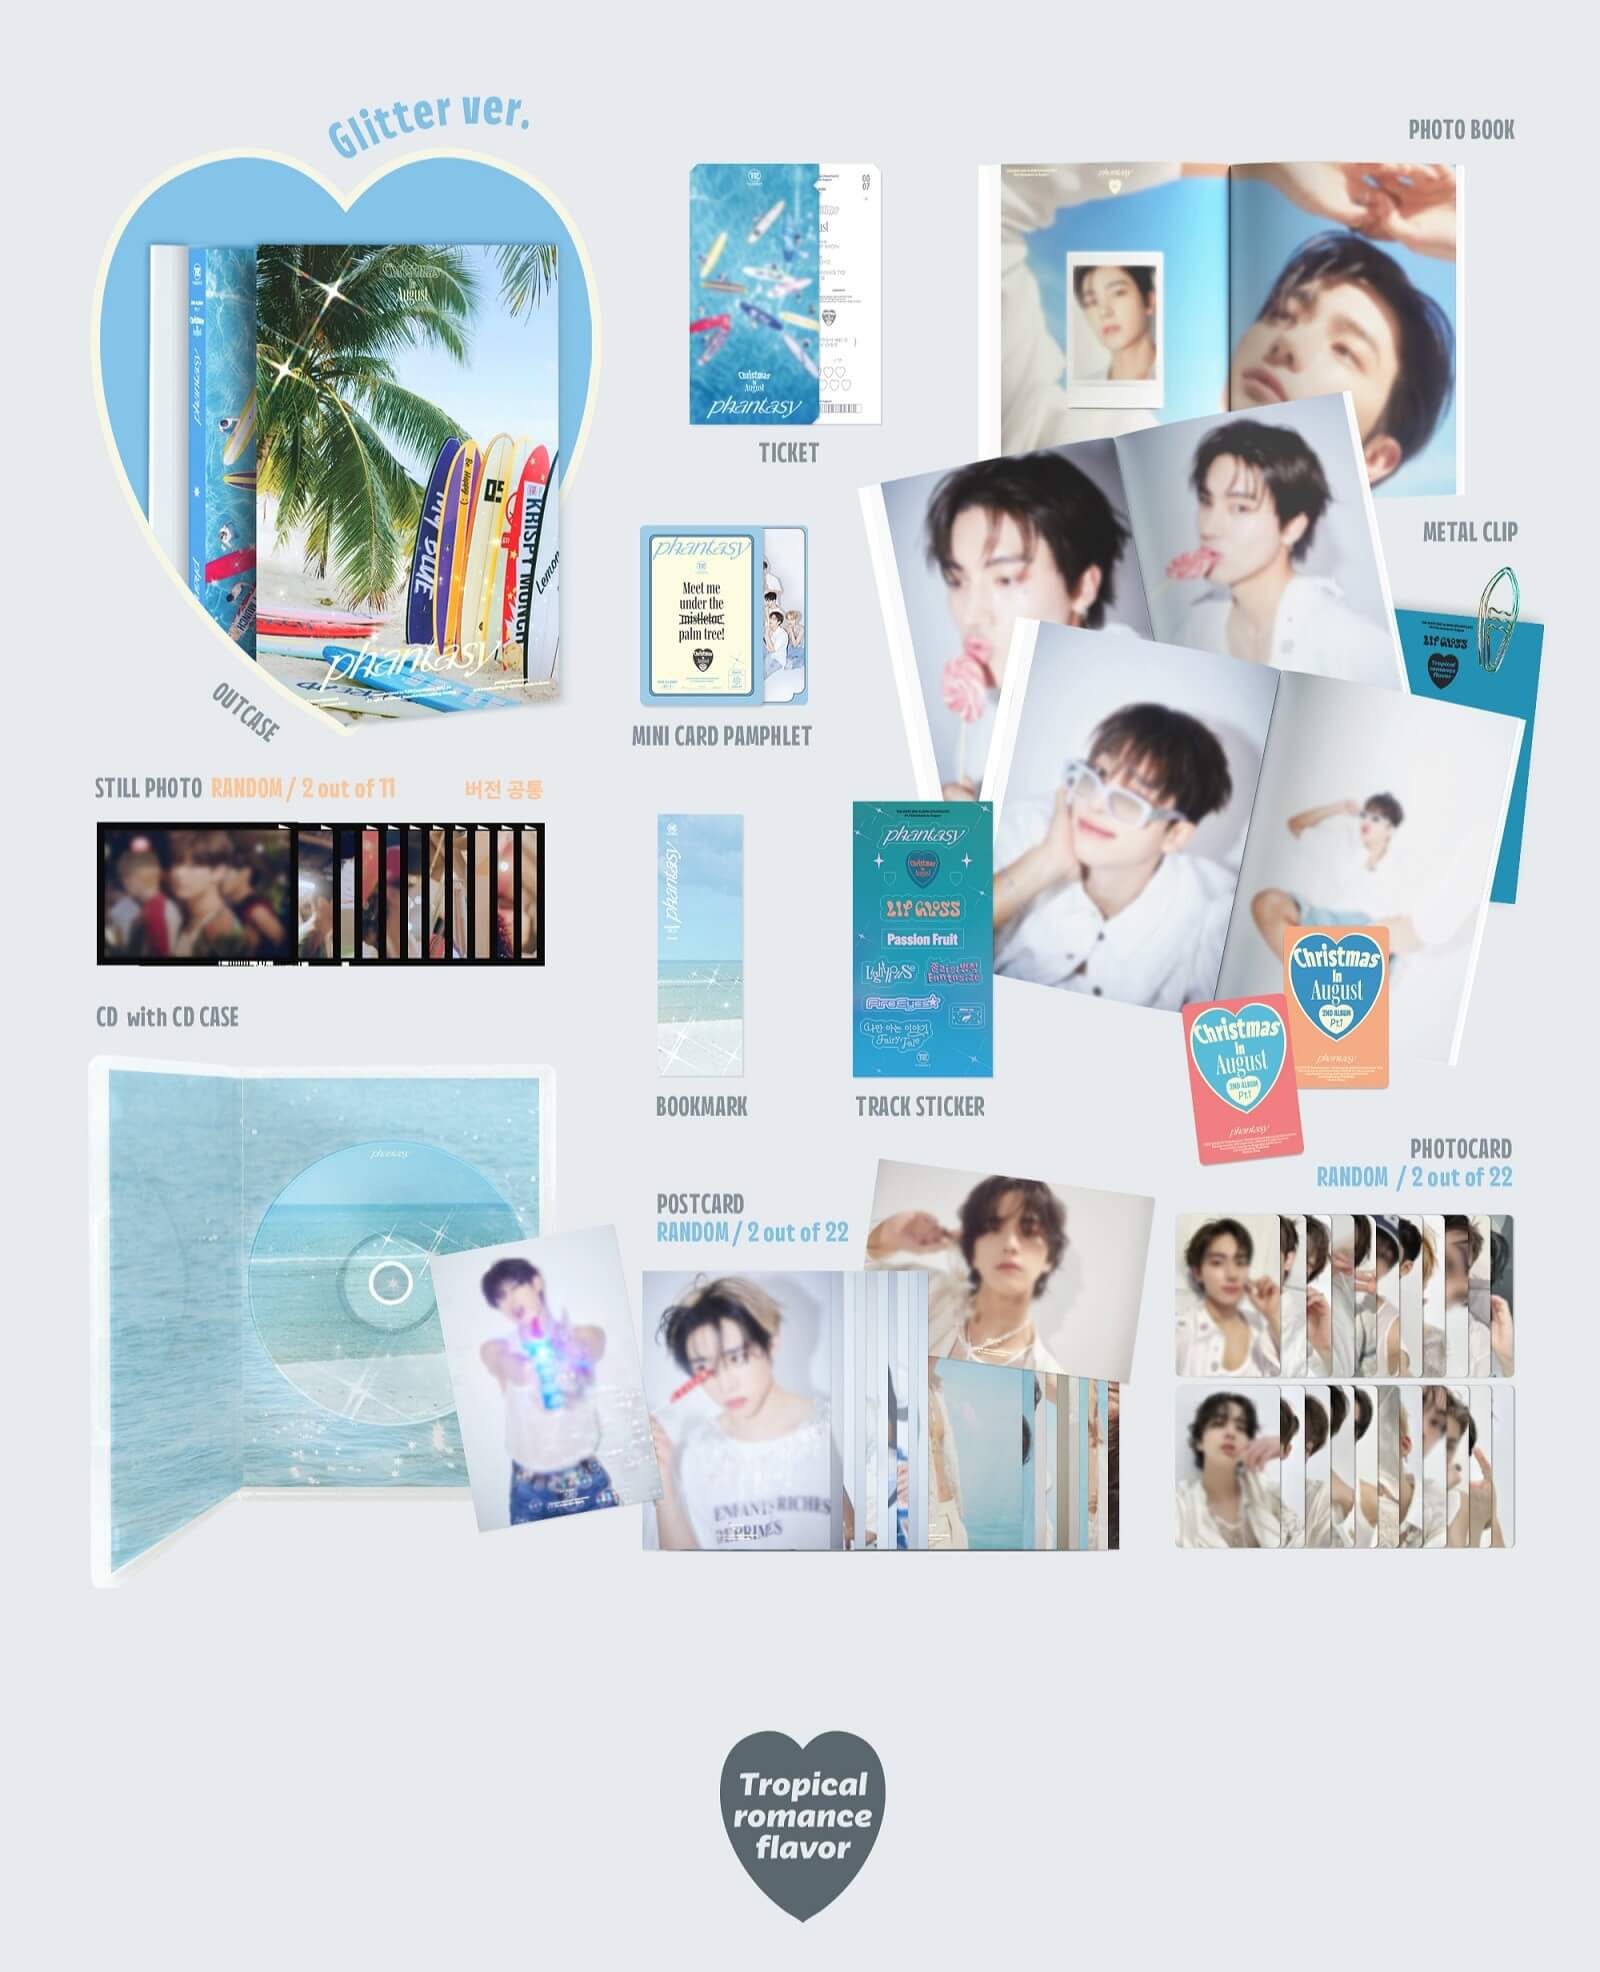 THE BOYZ PHANTASY Pt.1 Christmas In August - Glitter Version Inclusions Out Case CD Still Photos Photocards Ticket Mini Card Pamphlet Bookmark Photobook Track Sticker Postcard Metal Clip